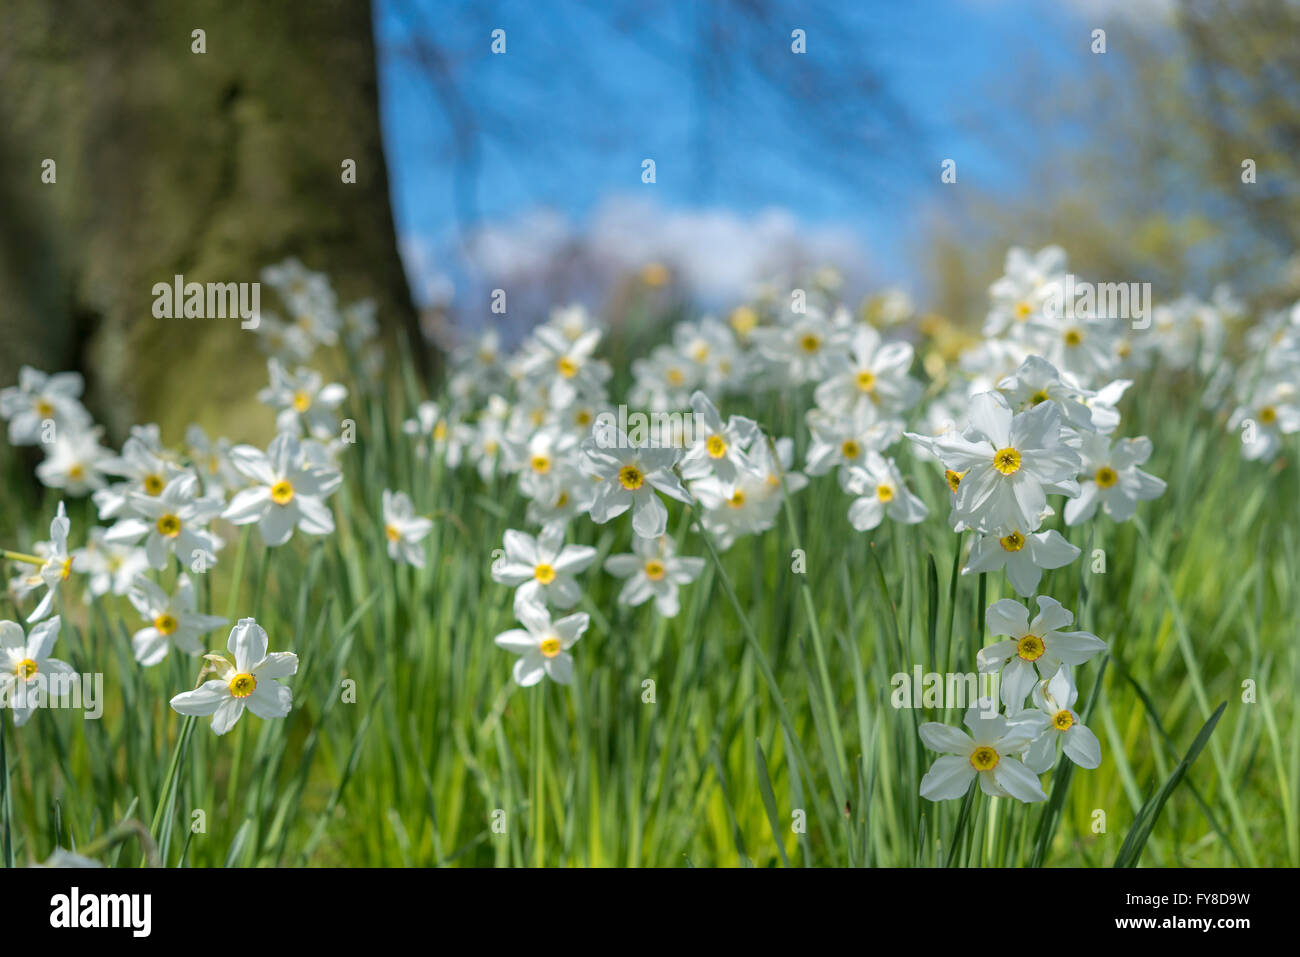 Single white daffodils flowering beneath trees in bright spring sunshine. A gorgeous image of spring colour and light. Stock Photo